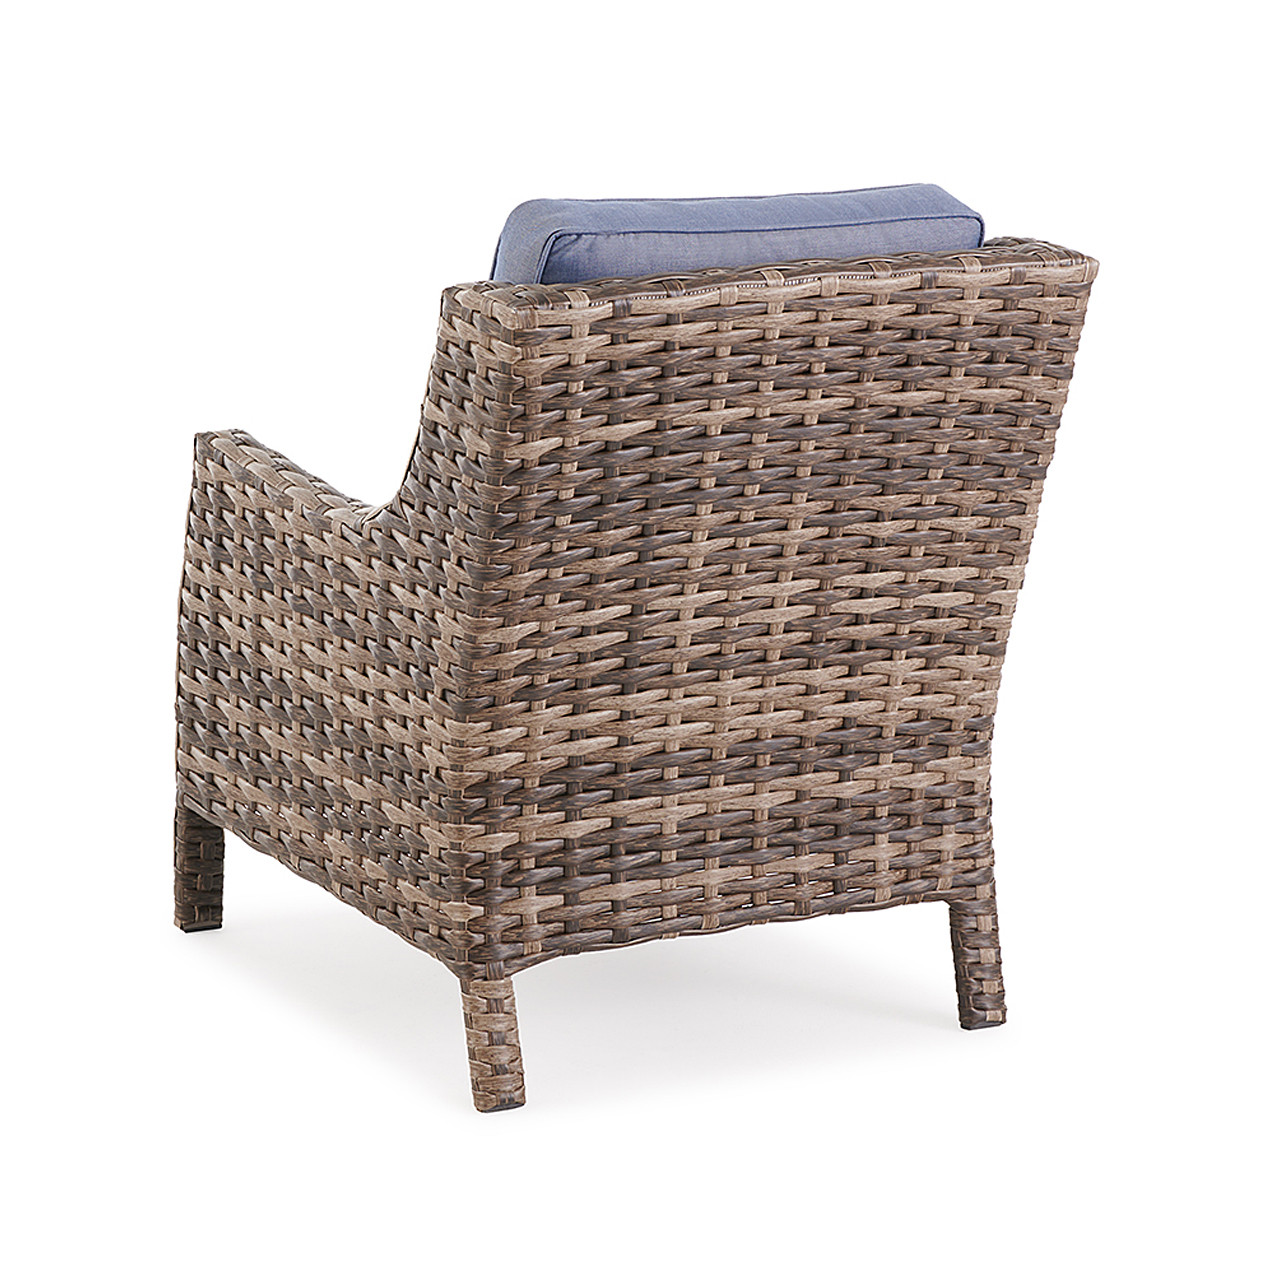 Cabo Caribou Outdoor Wicker and Remy Denim Cushion Club Chair